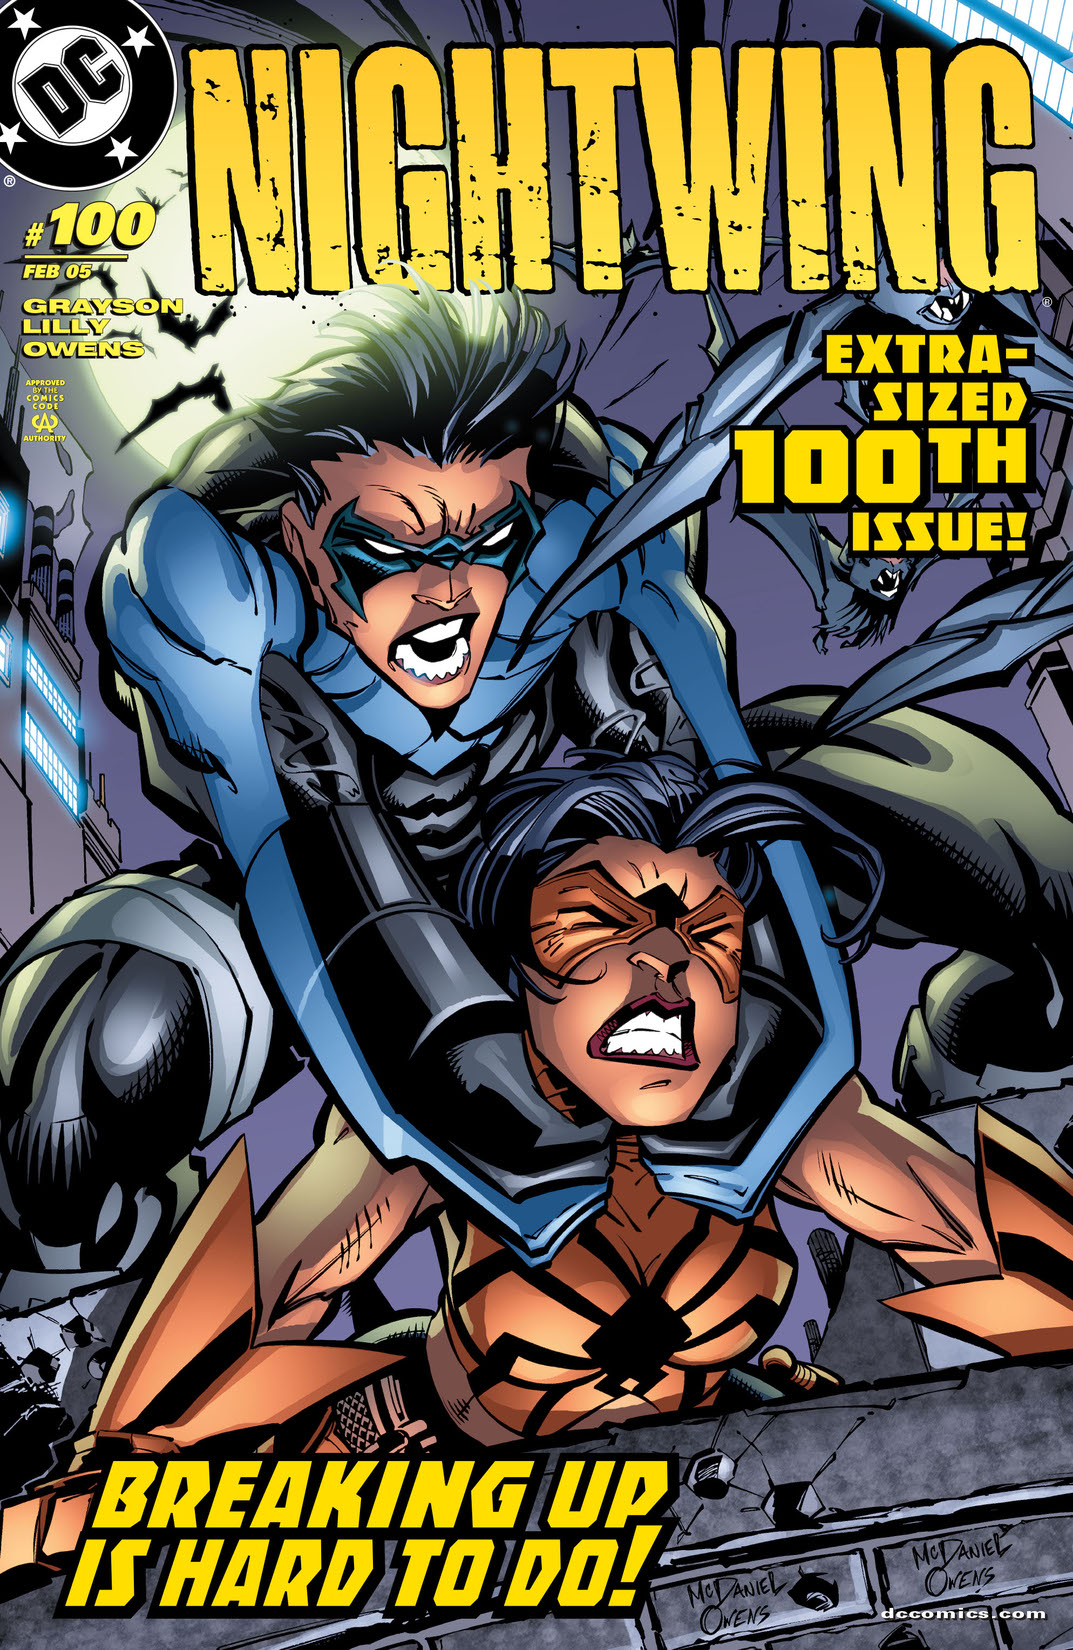 Nightwing (1996-) #100 preview images